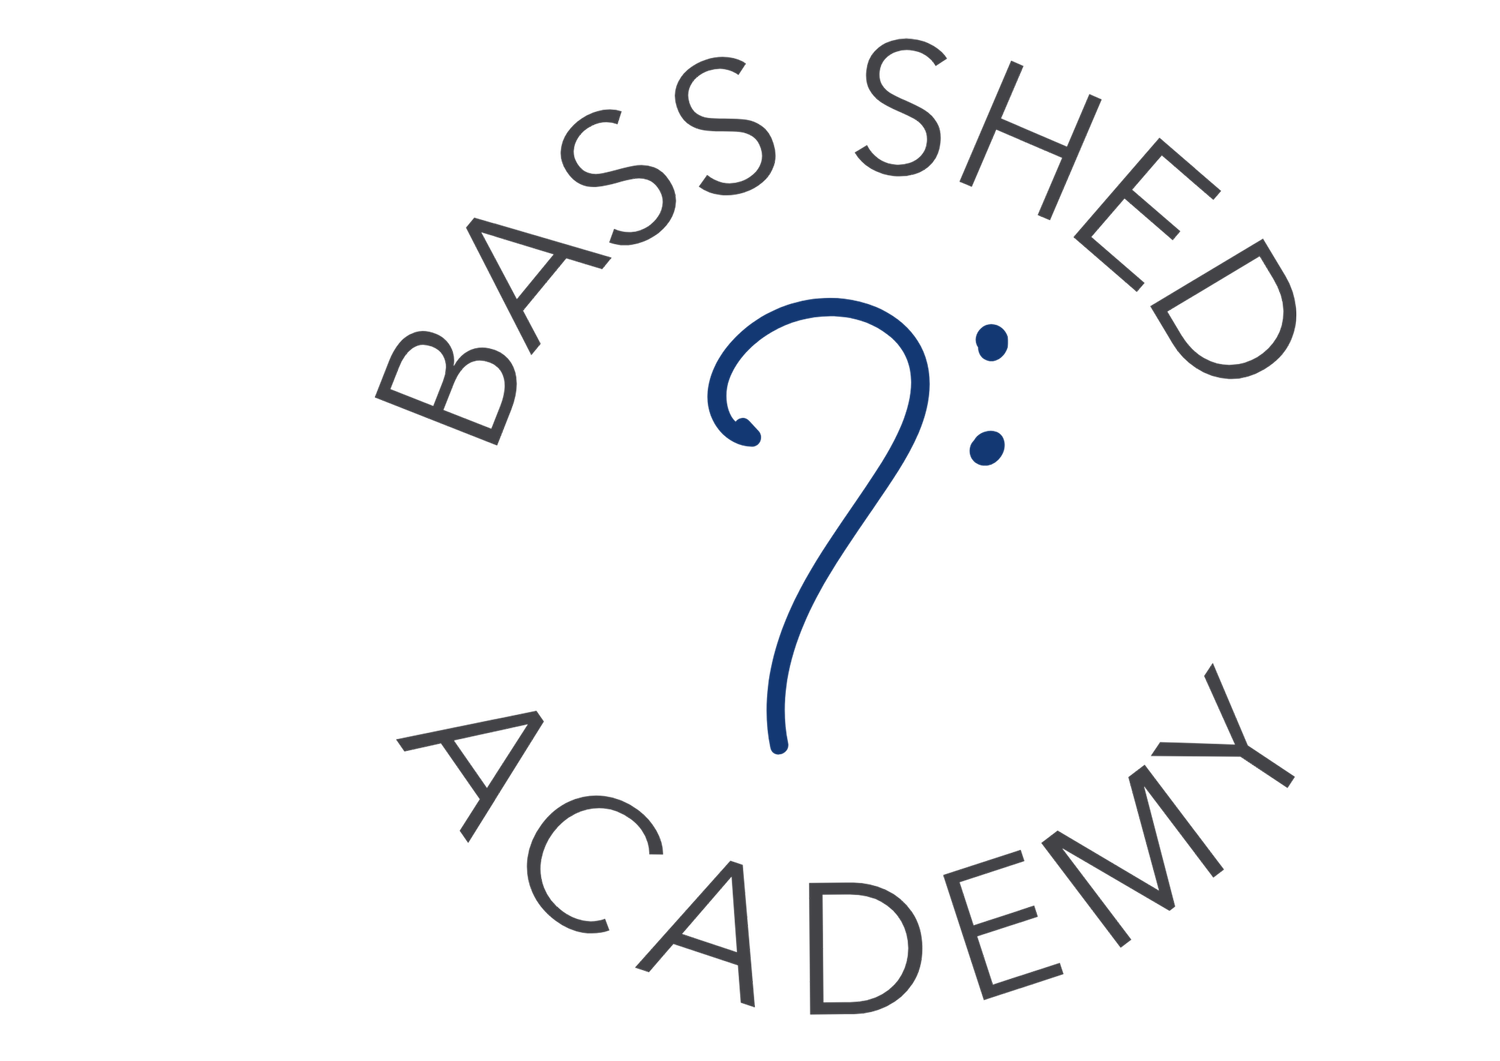 Bass Shed Academy